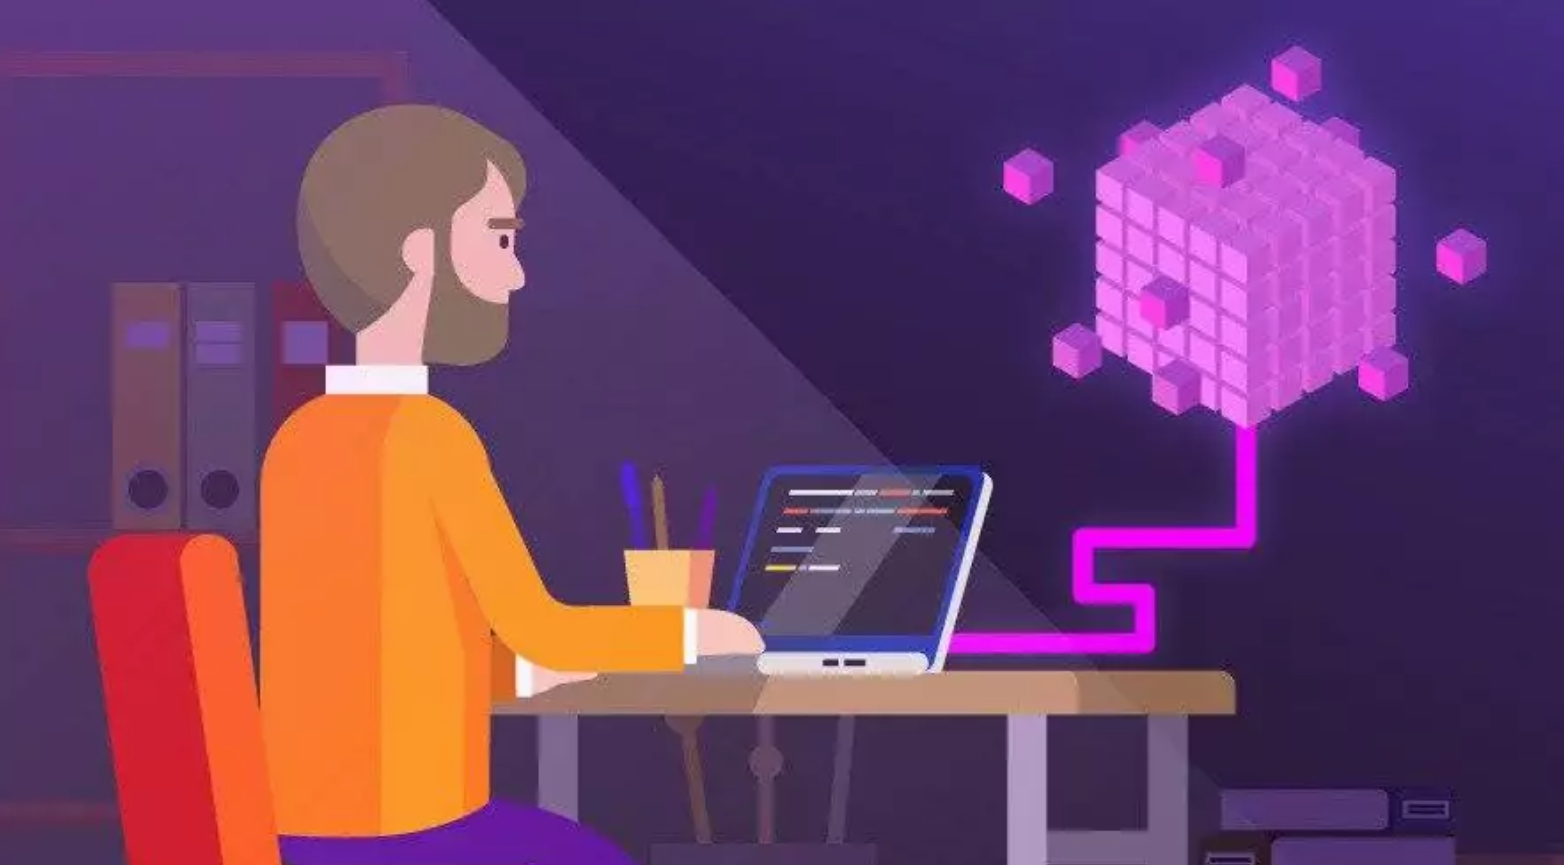 How much does a blockchain developer earn?